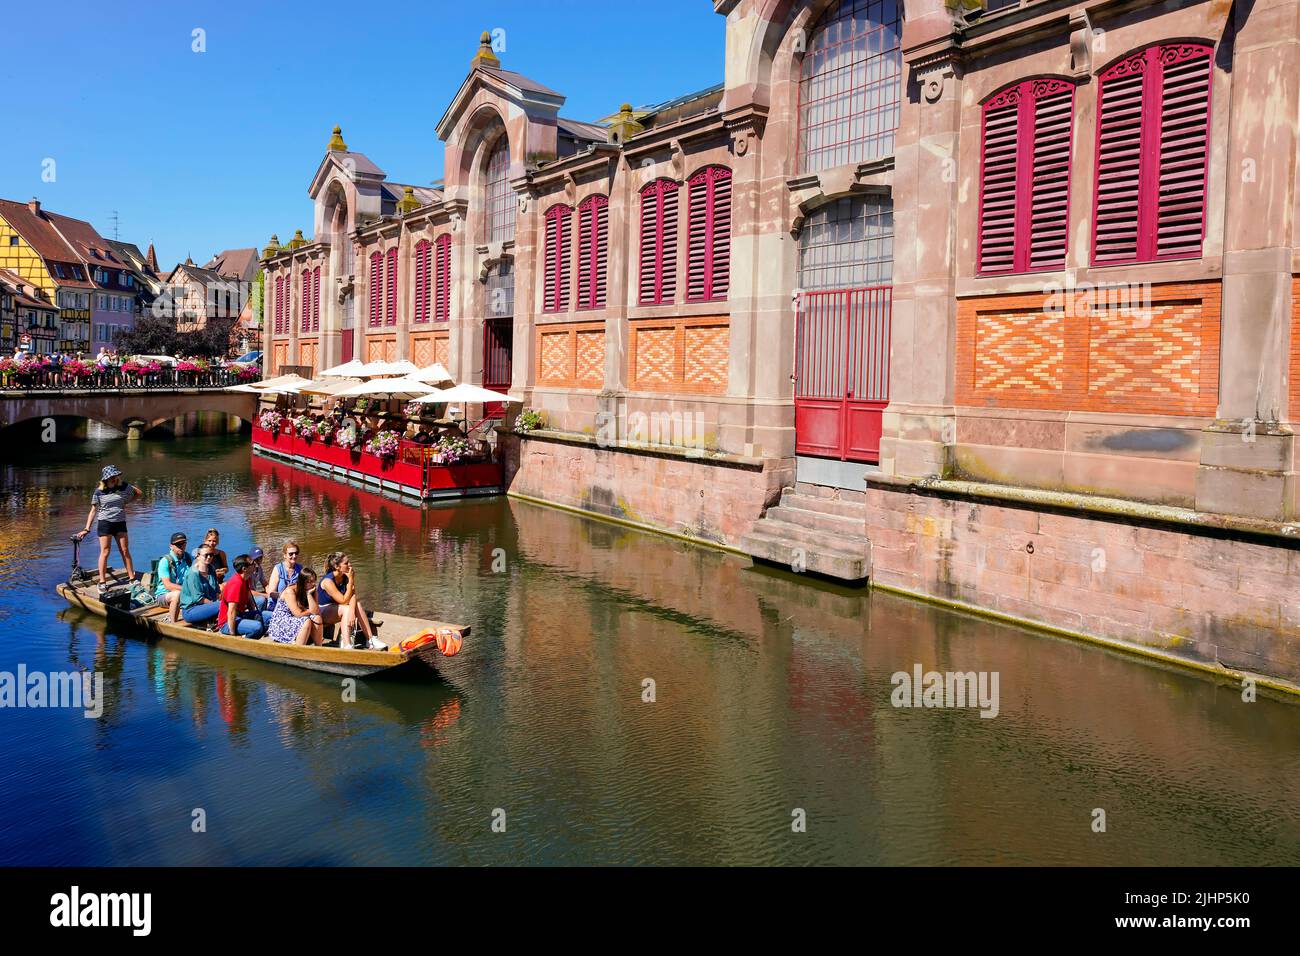 So-called Little Venice (Petite; Venise) by Lauch river in Colmar. Colorful traditional Alsatian market hall in the historic town of Colmar, Alsace, F Stock Photo